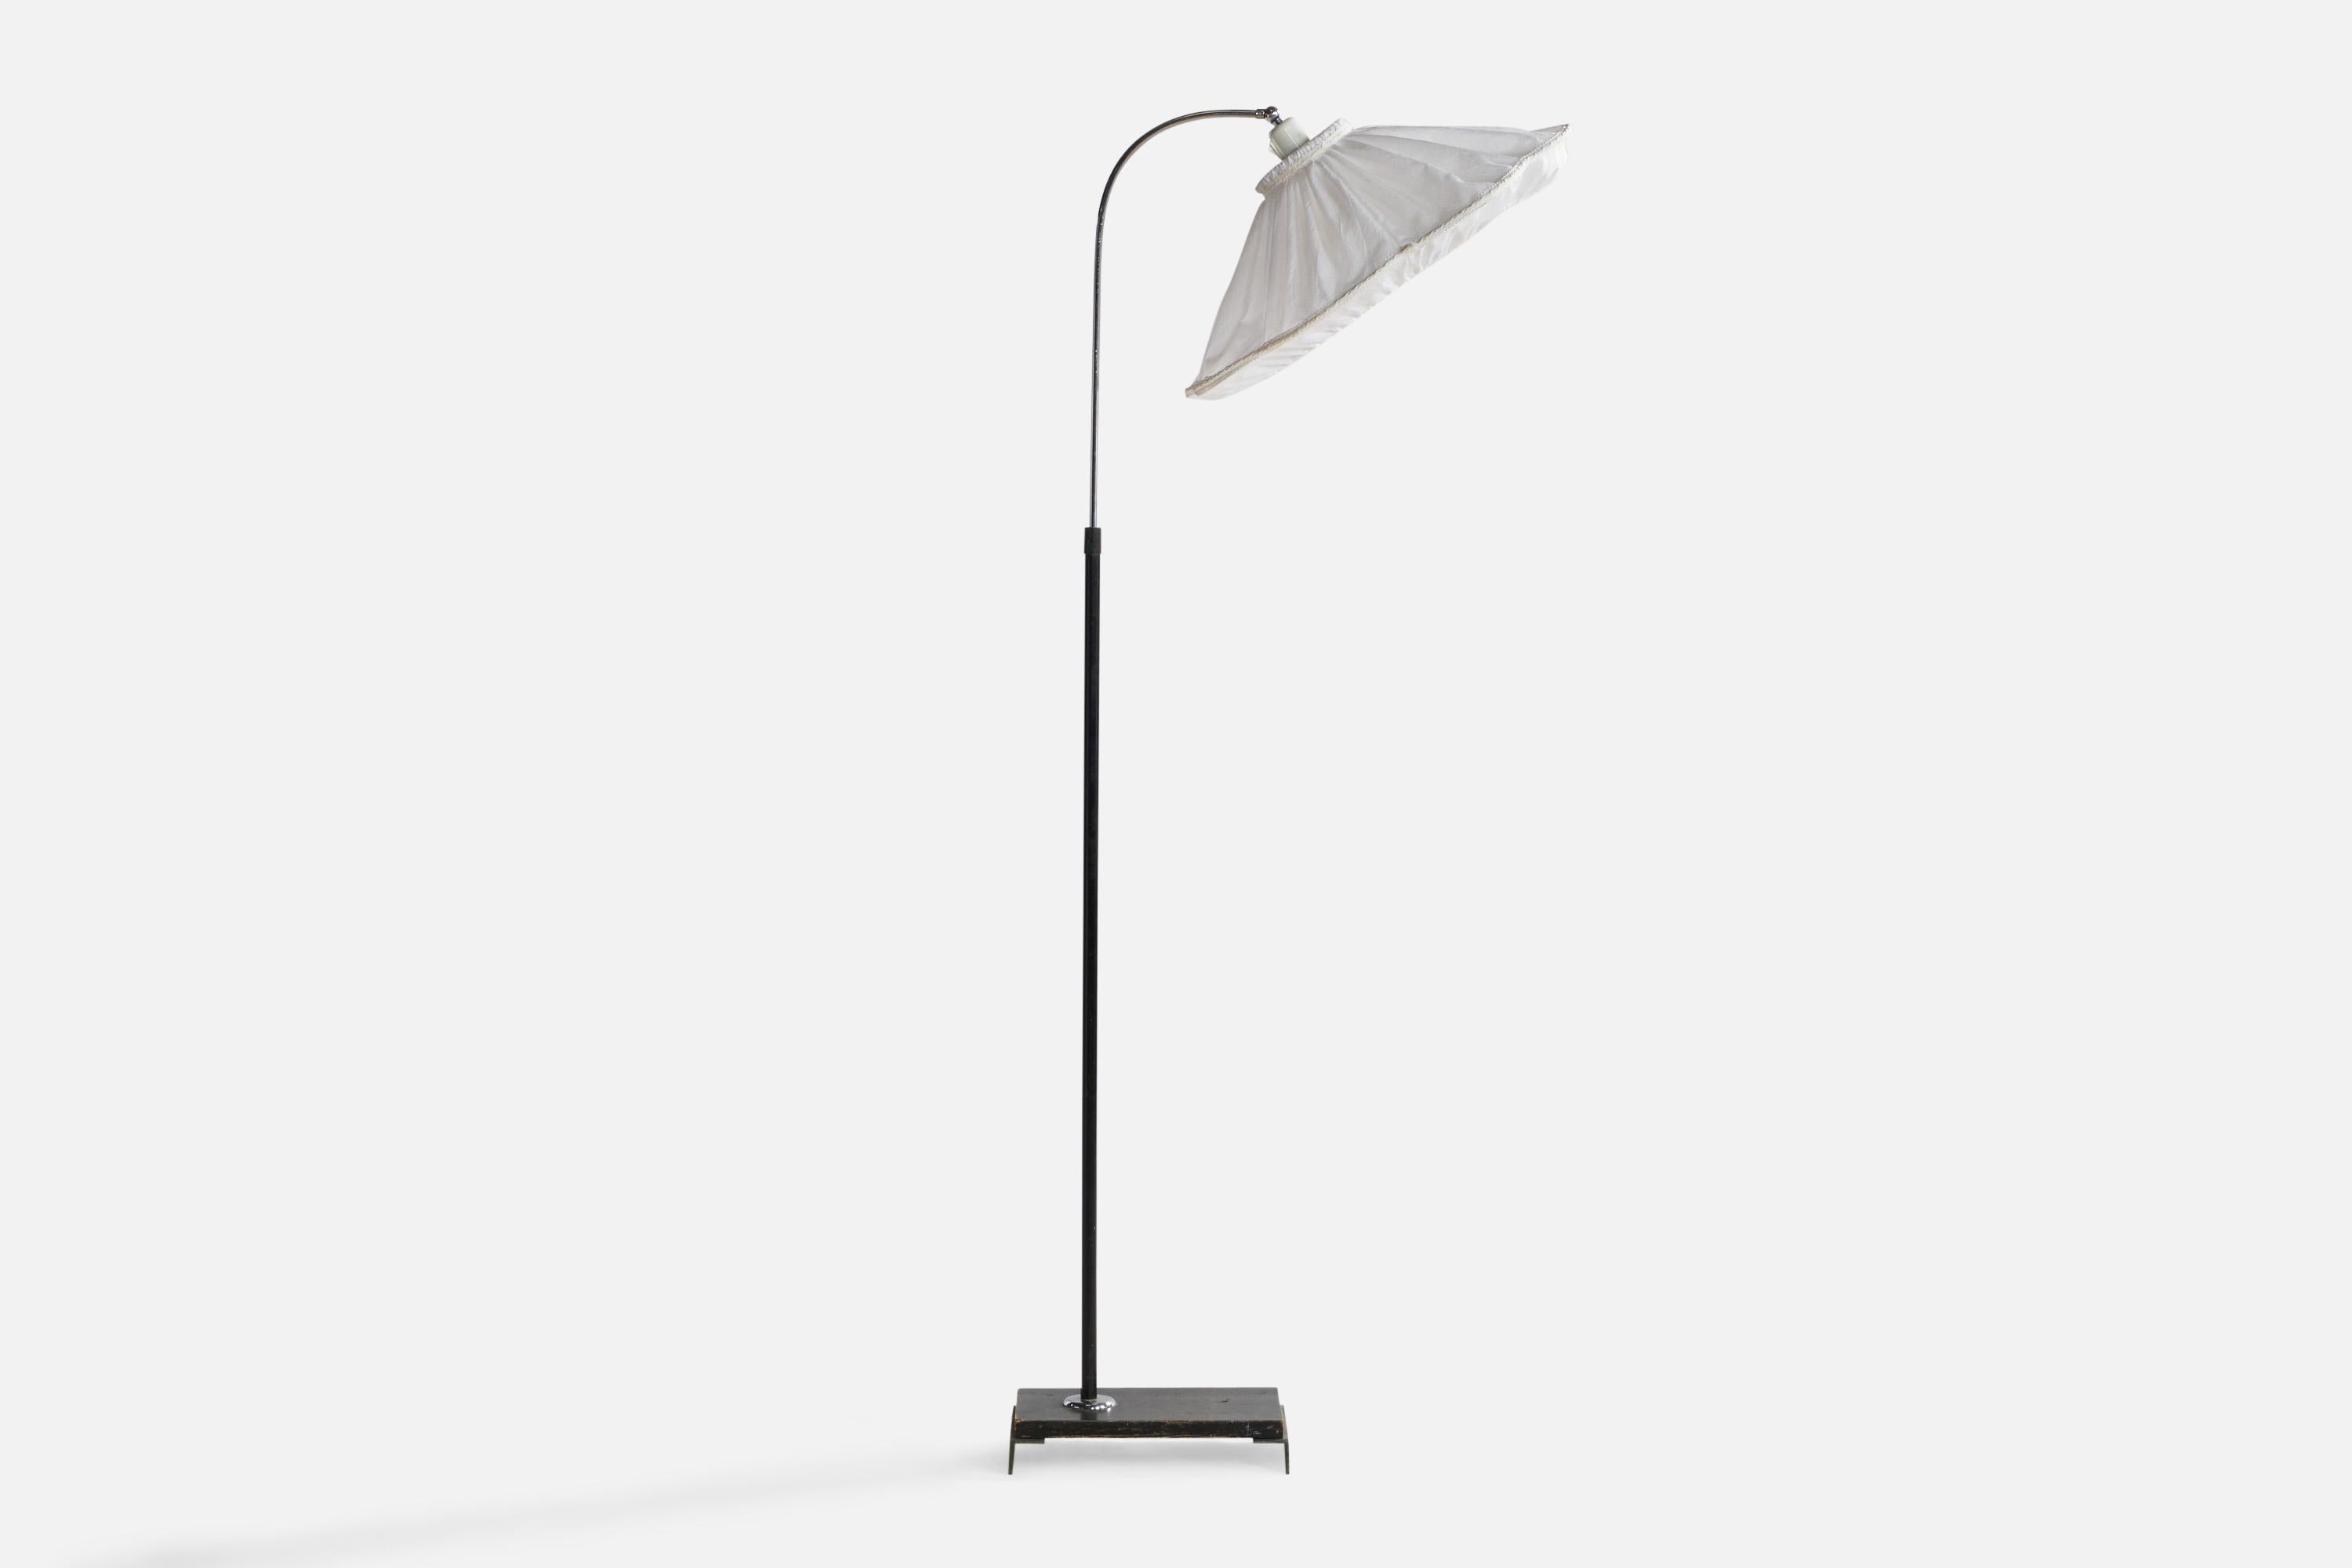 A black-lacquered wood, chrome and white fabric floor lamp designed and produced in Sweden, c. 1930s.

Overall Dimensions (inches): 60.5” H x 21” W x 24.25” Depth. Stated dimensions include shade.
Dimensions vary based on position of light. Height